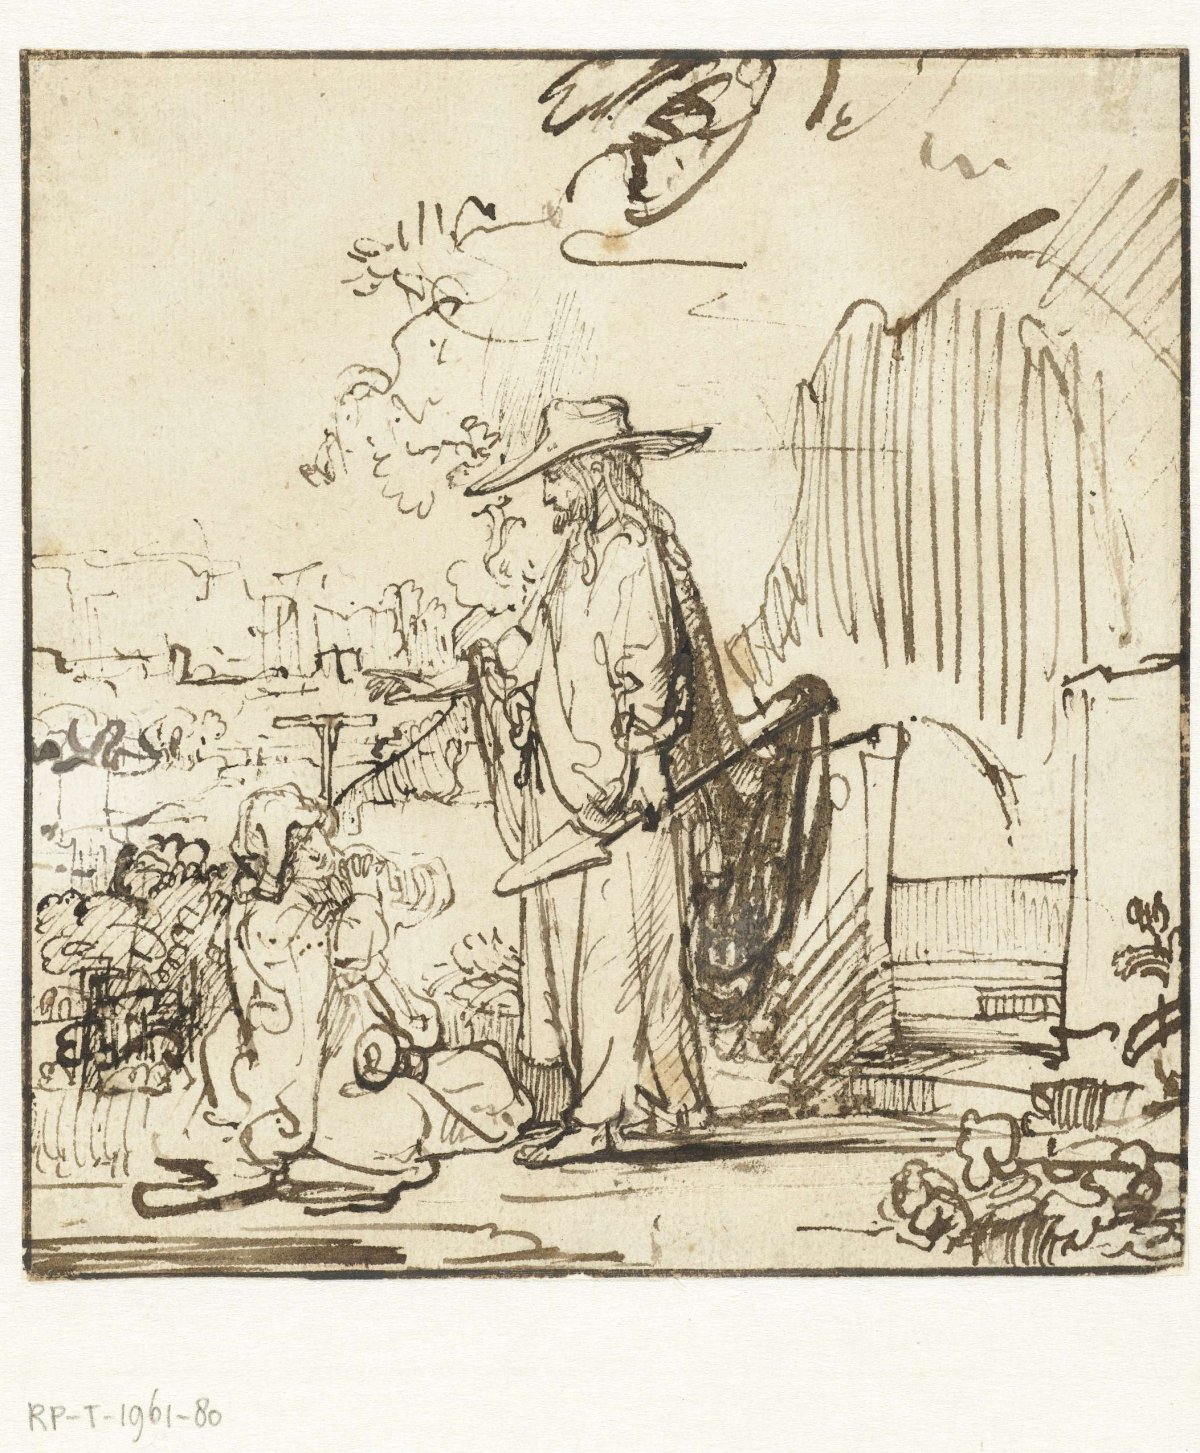 Christ Appearing to Mary Magdalene as a Gardener (Noli me tangere), Rembrandt van Rijn, c. 1645